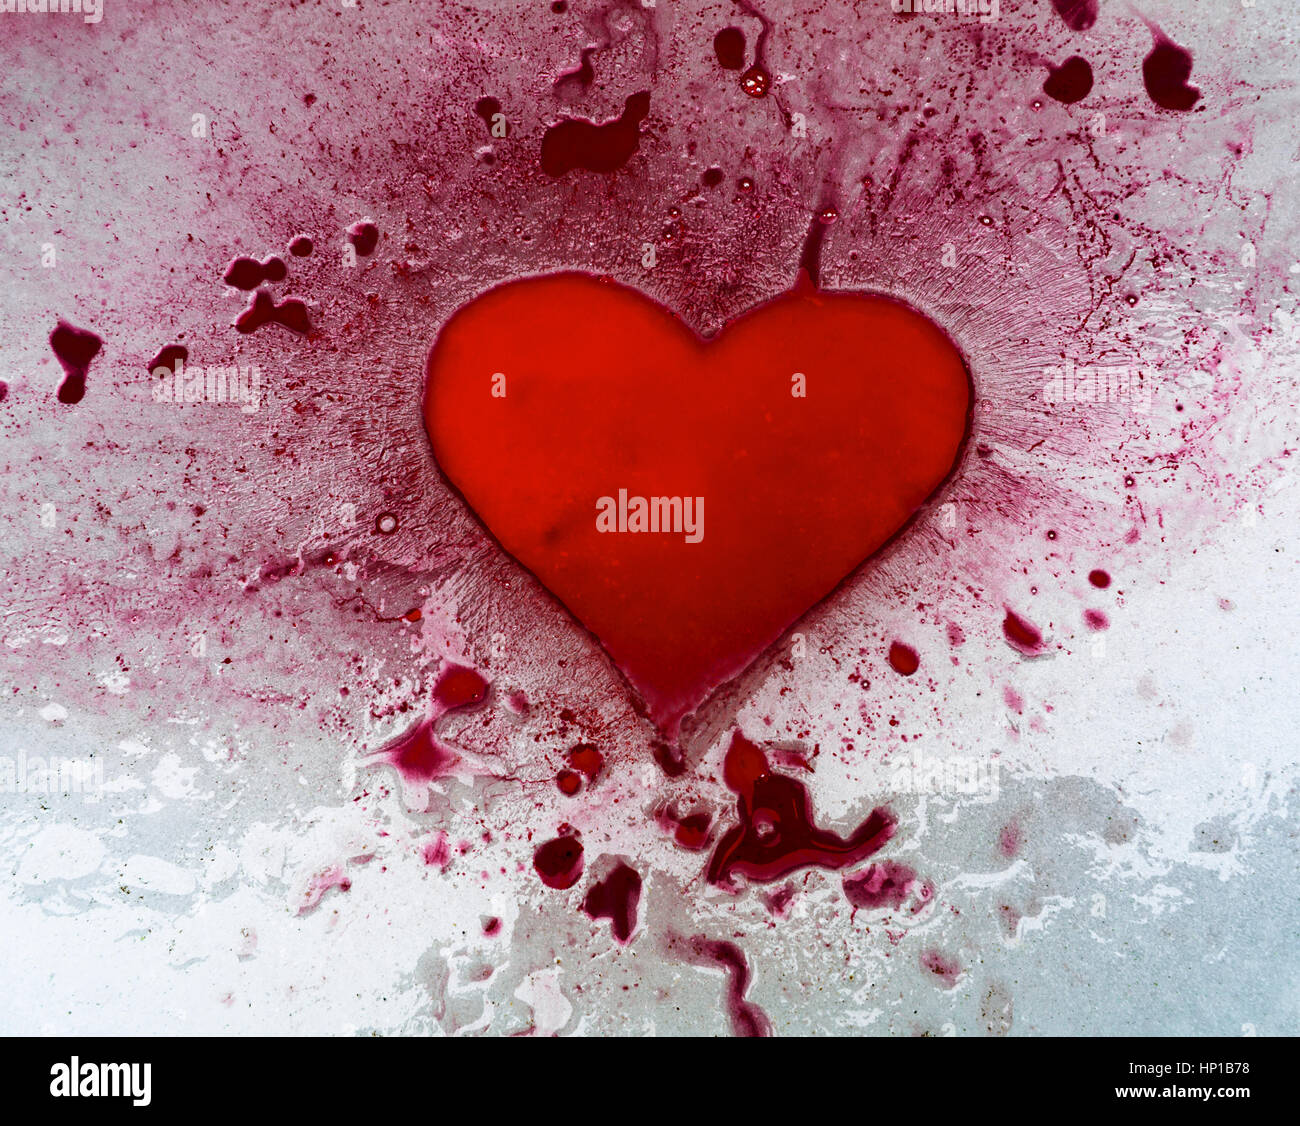 Red ink heart on ice. Red ink pooling into a heart shaped hollow, and across and into other depressions in the surface of ice. Stock Photo